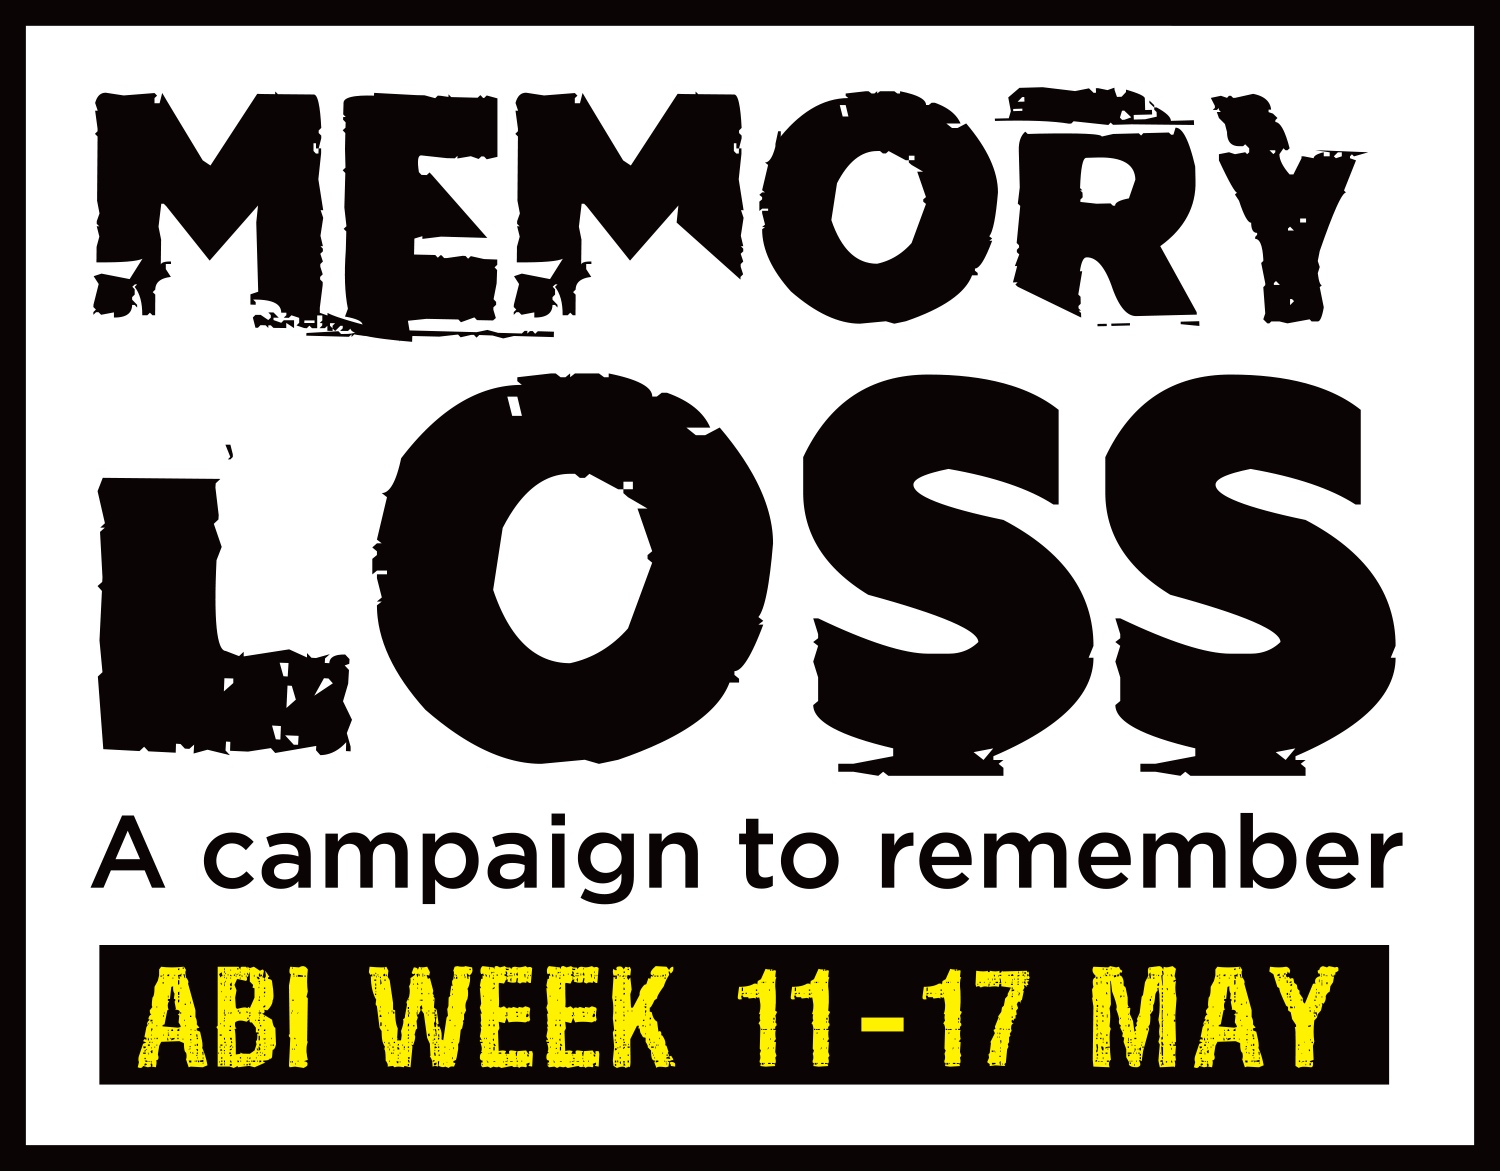 Memory Loss: A campaign to remember